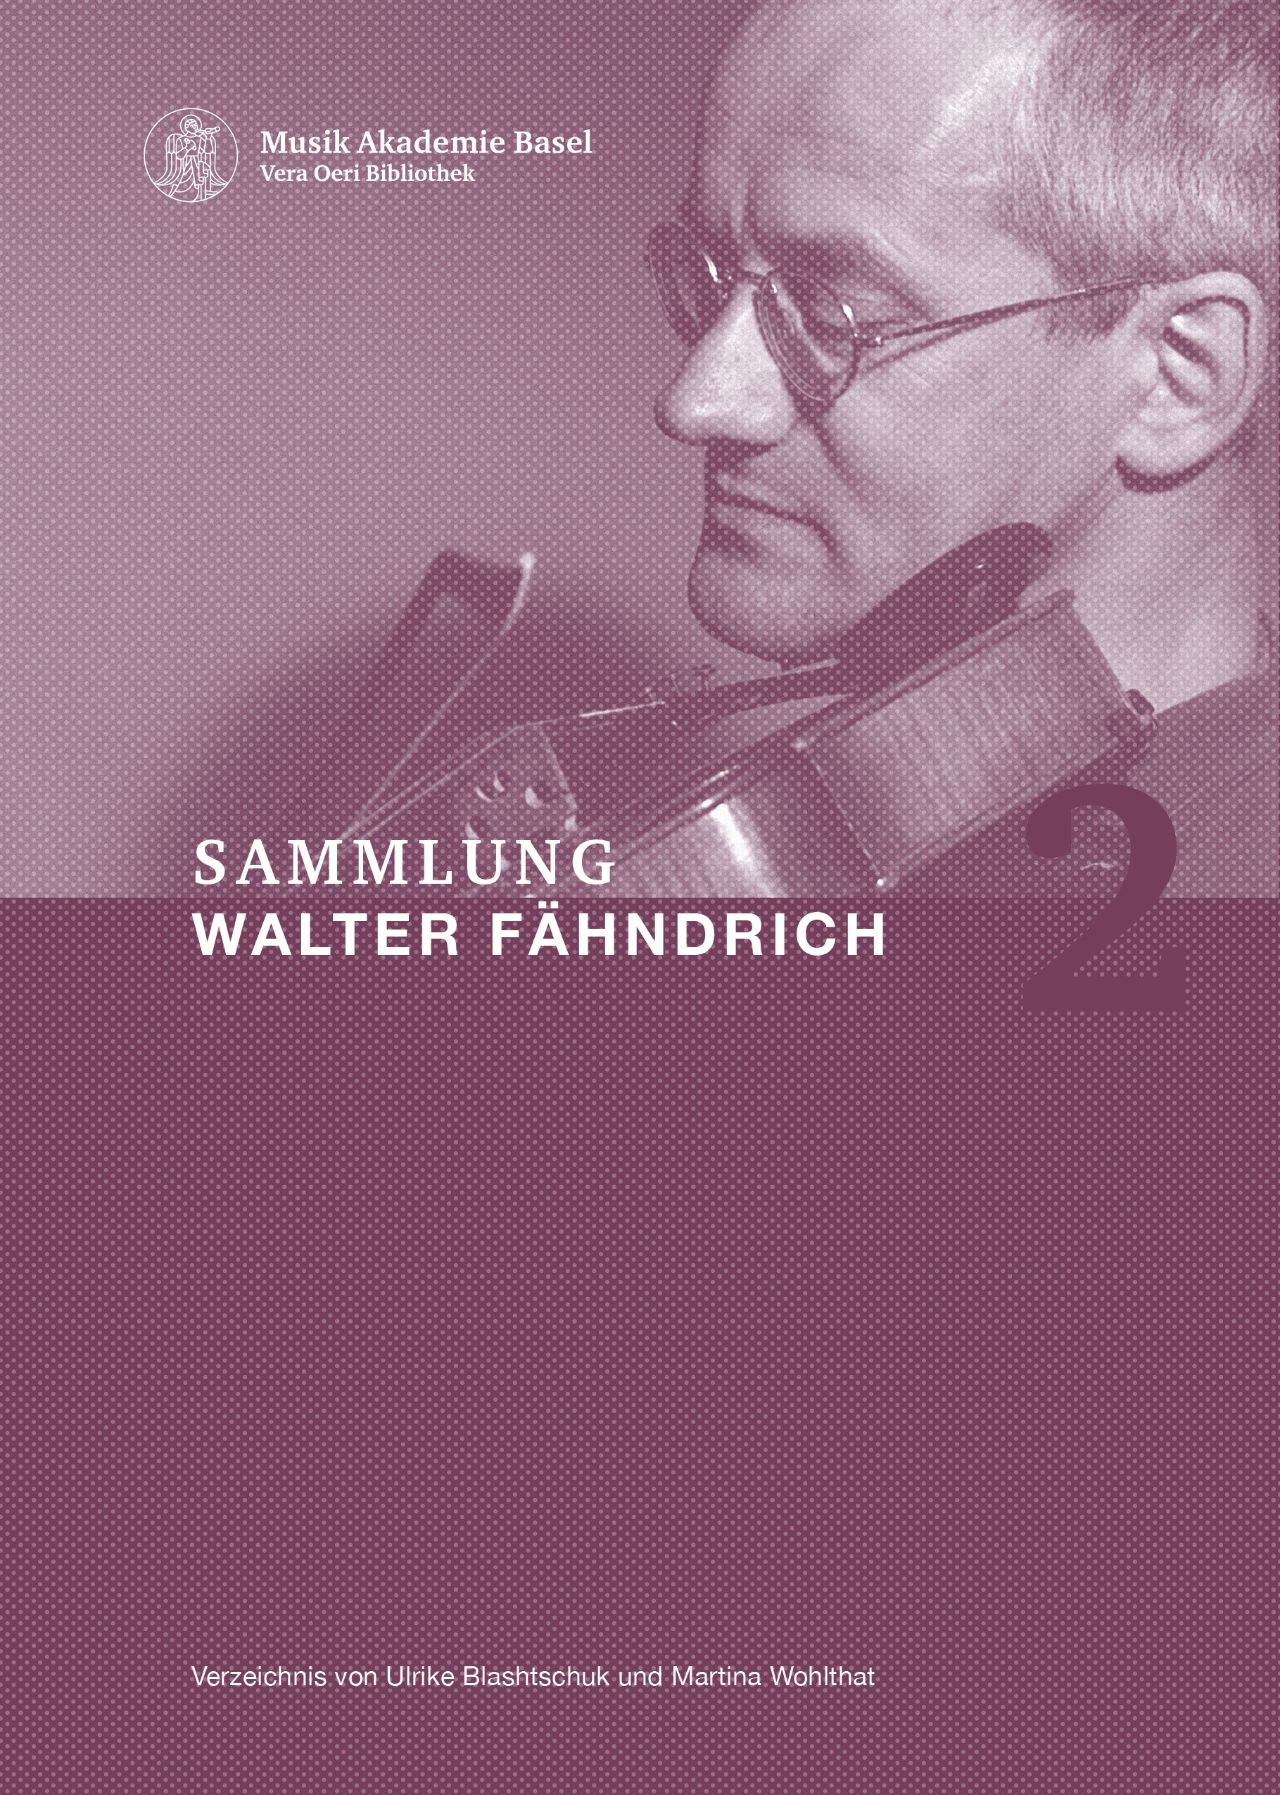 Cover of the  Walter Fähndrich Collection